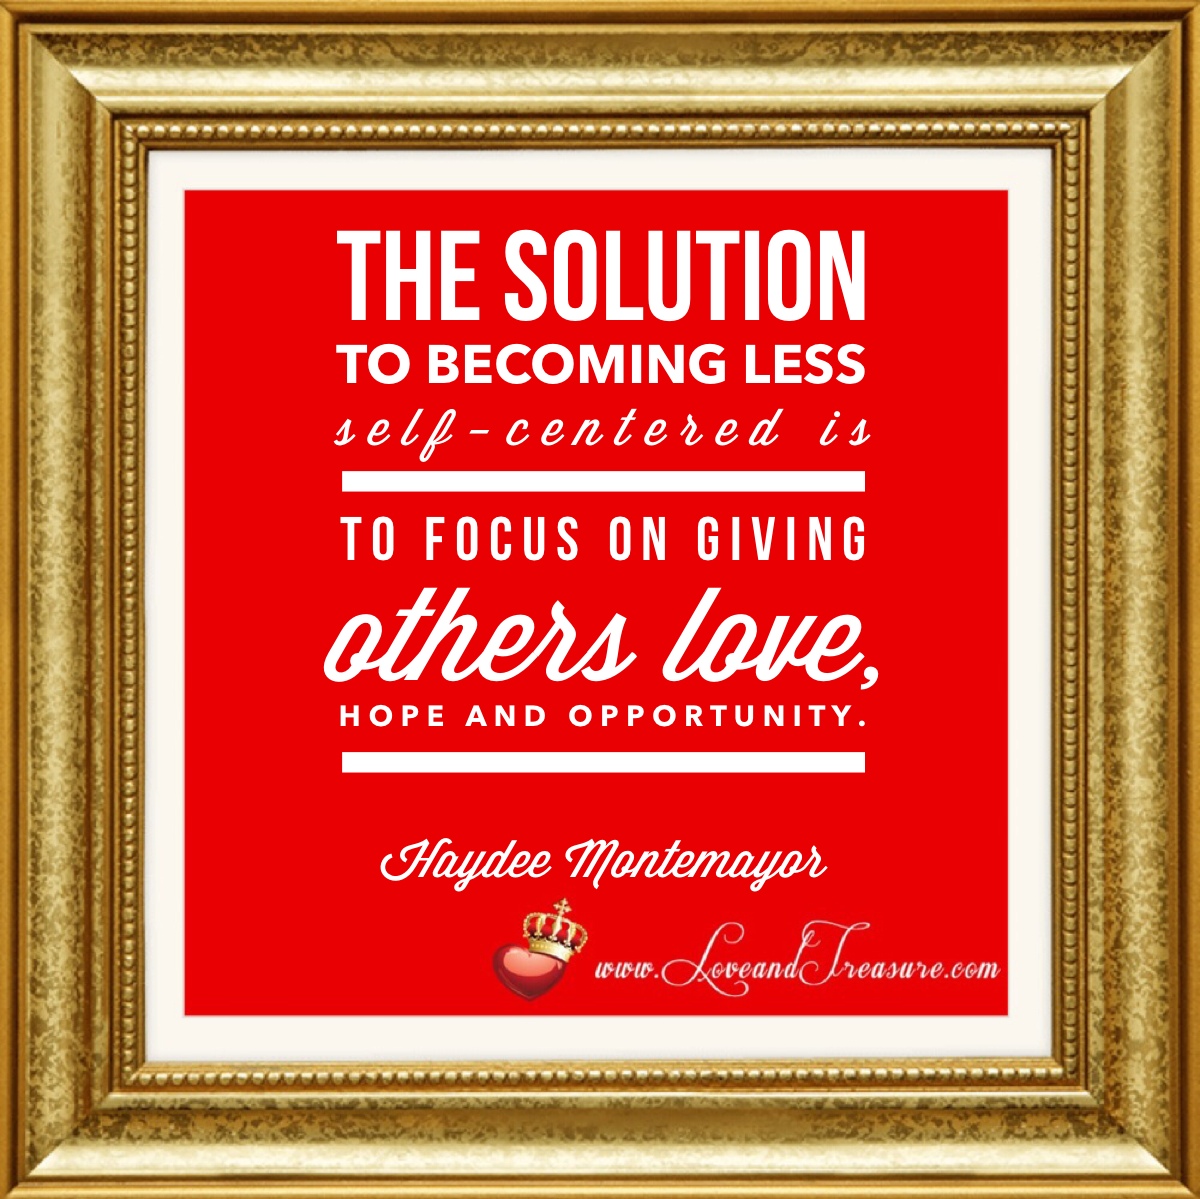 https://loveandtreasure.com/storage/2014/10/The-Solution-to-Becoming-Less-self-centered-is-to-focus-on-giving-others-love-hope-and-opportunity.jpg, the solution to becoming less self centered is to focus on giving others love, hope and opportunity, haydee montemayor, Why Aren't More People Focusing on Love? Answer: We're so self-centered!, love and treasure